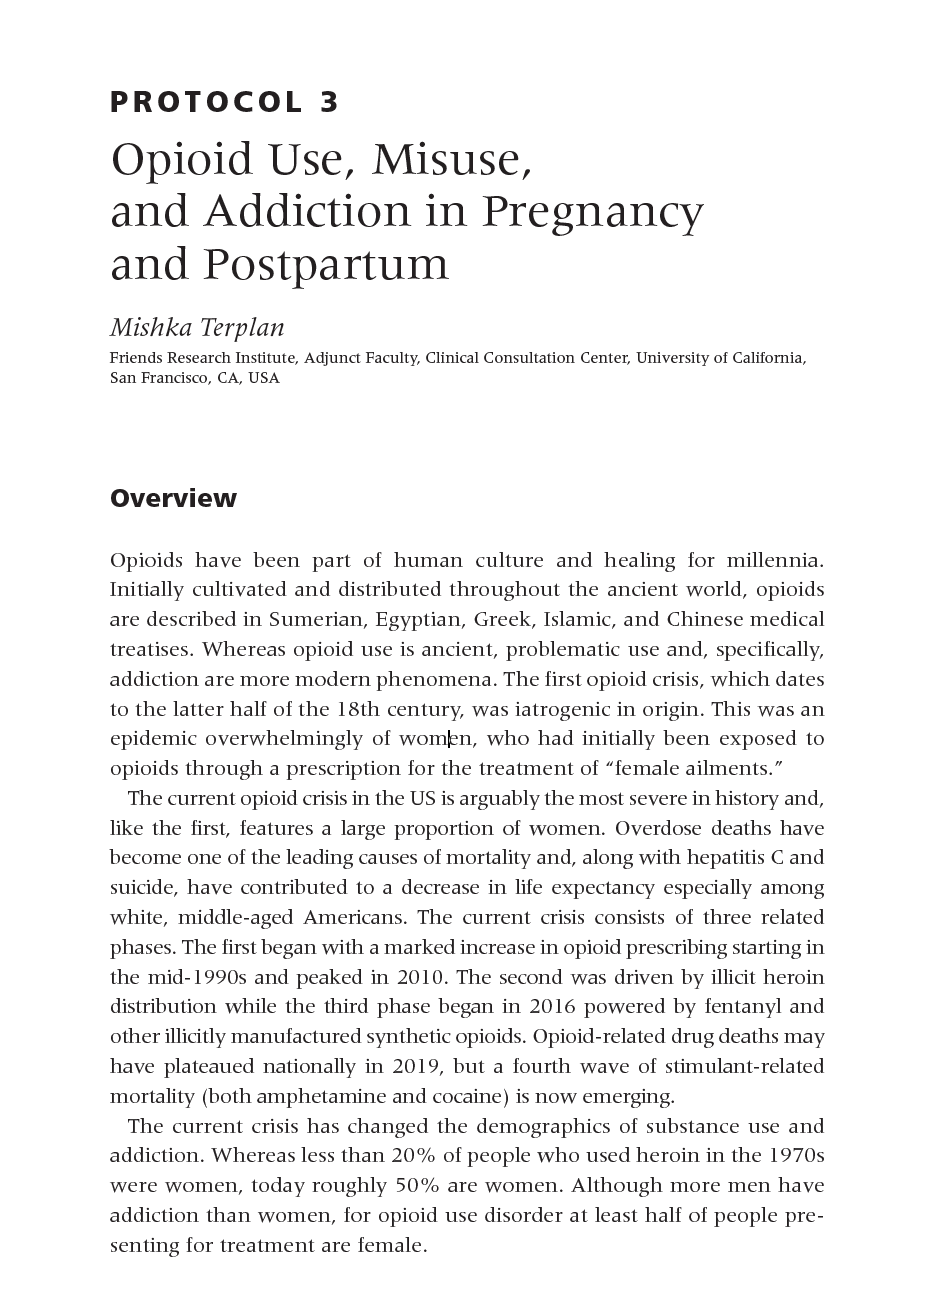 Full Protocol 3: Opioid Use, Misuse, and Addiction in Pregnancy and Postpartum